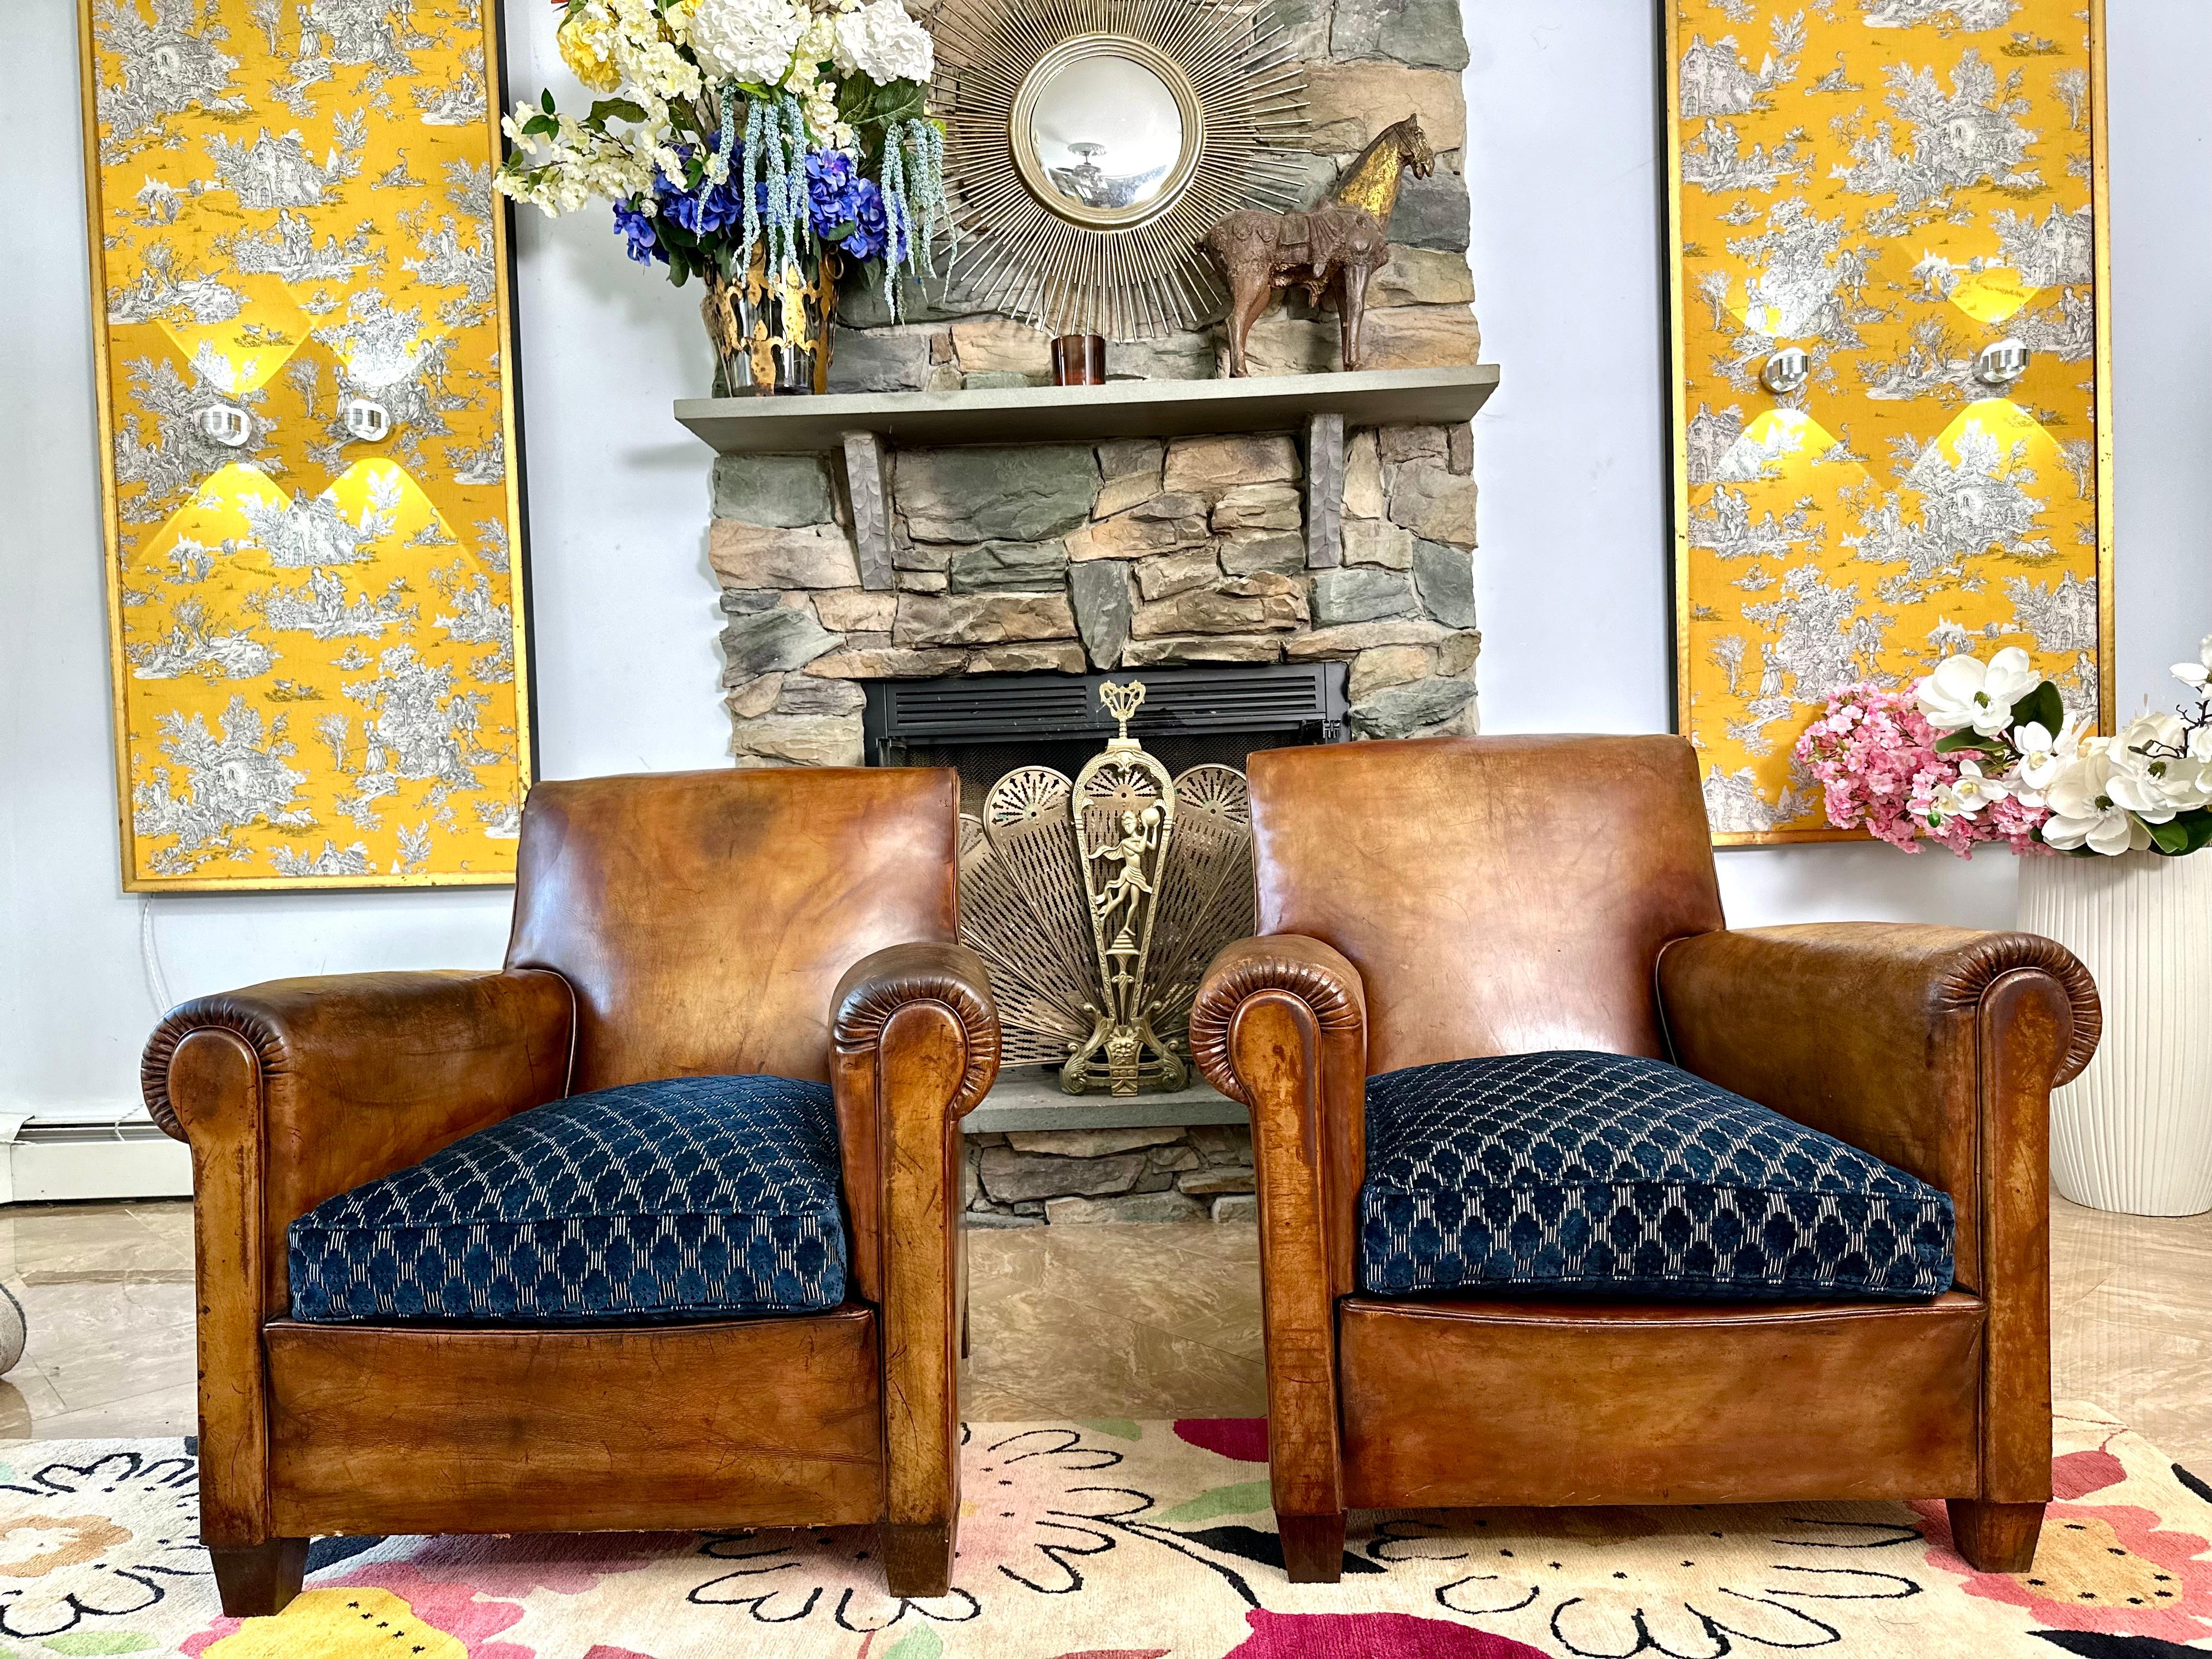 Magnificent pair of Art Deco French leather club chairs - circa 1930's with spectacular soft and supple original leather. This is a beautiful, highly coveted model clubs pair with a lot of character and charm. Recently reupholstered cushions with